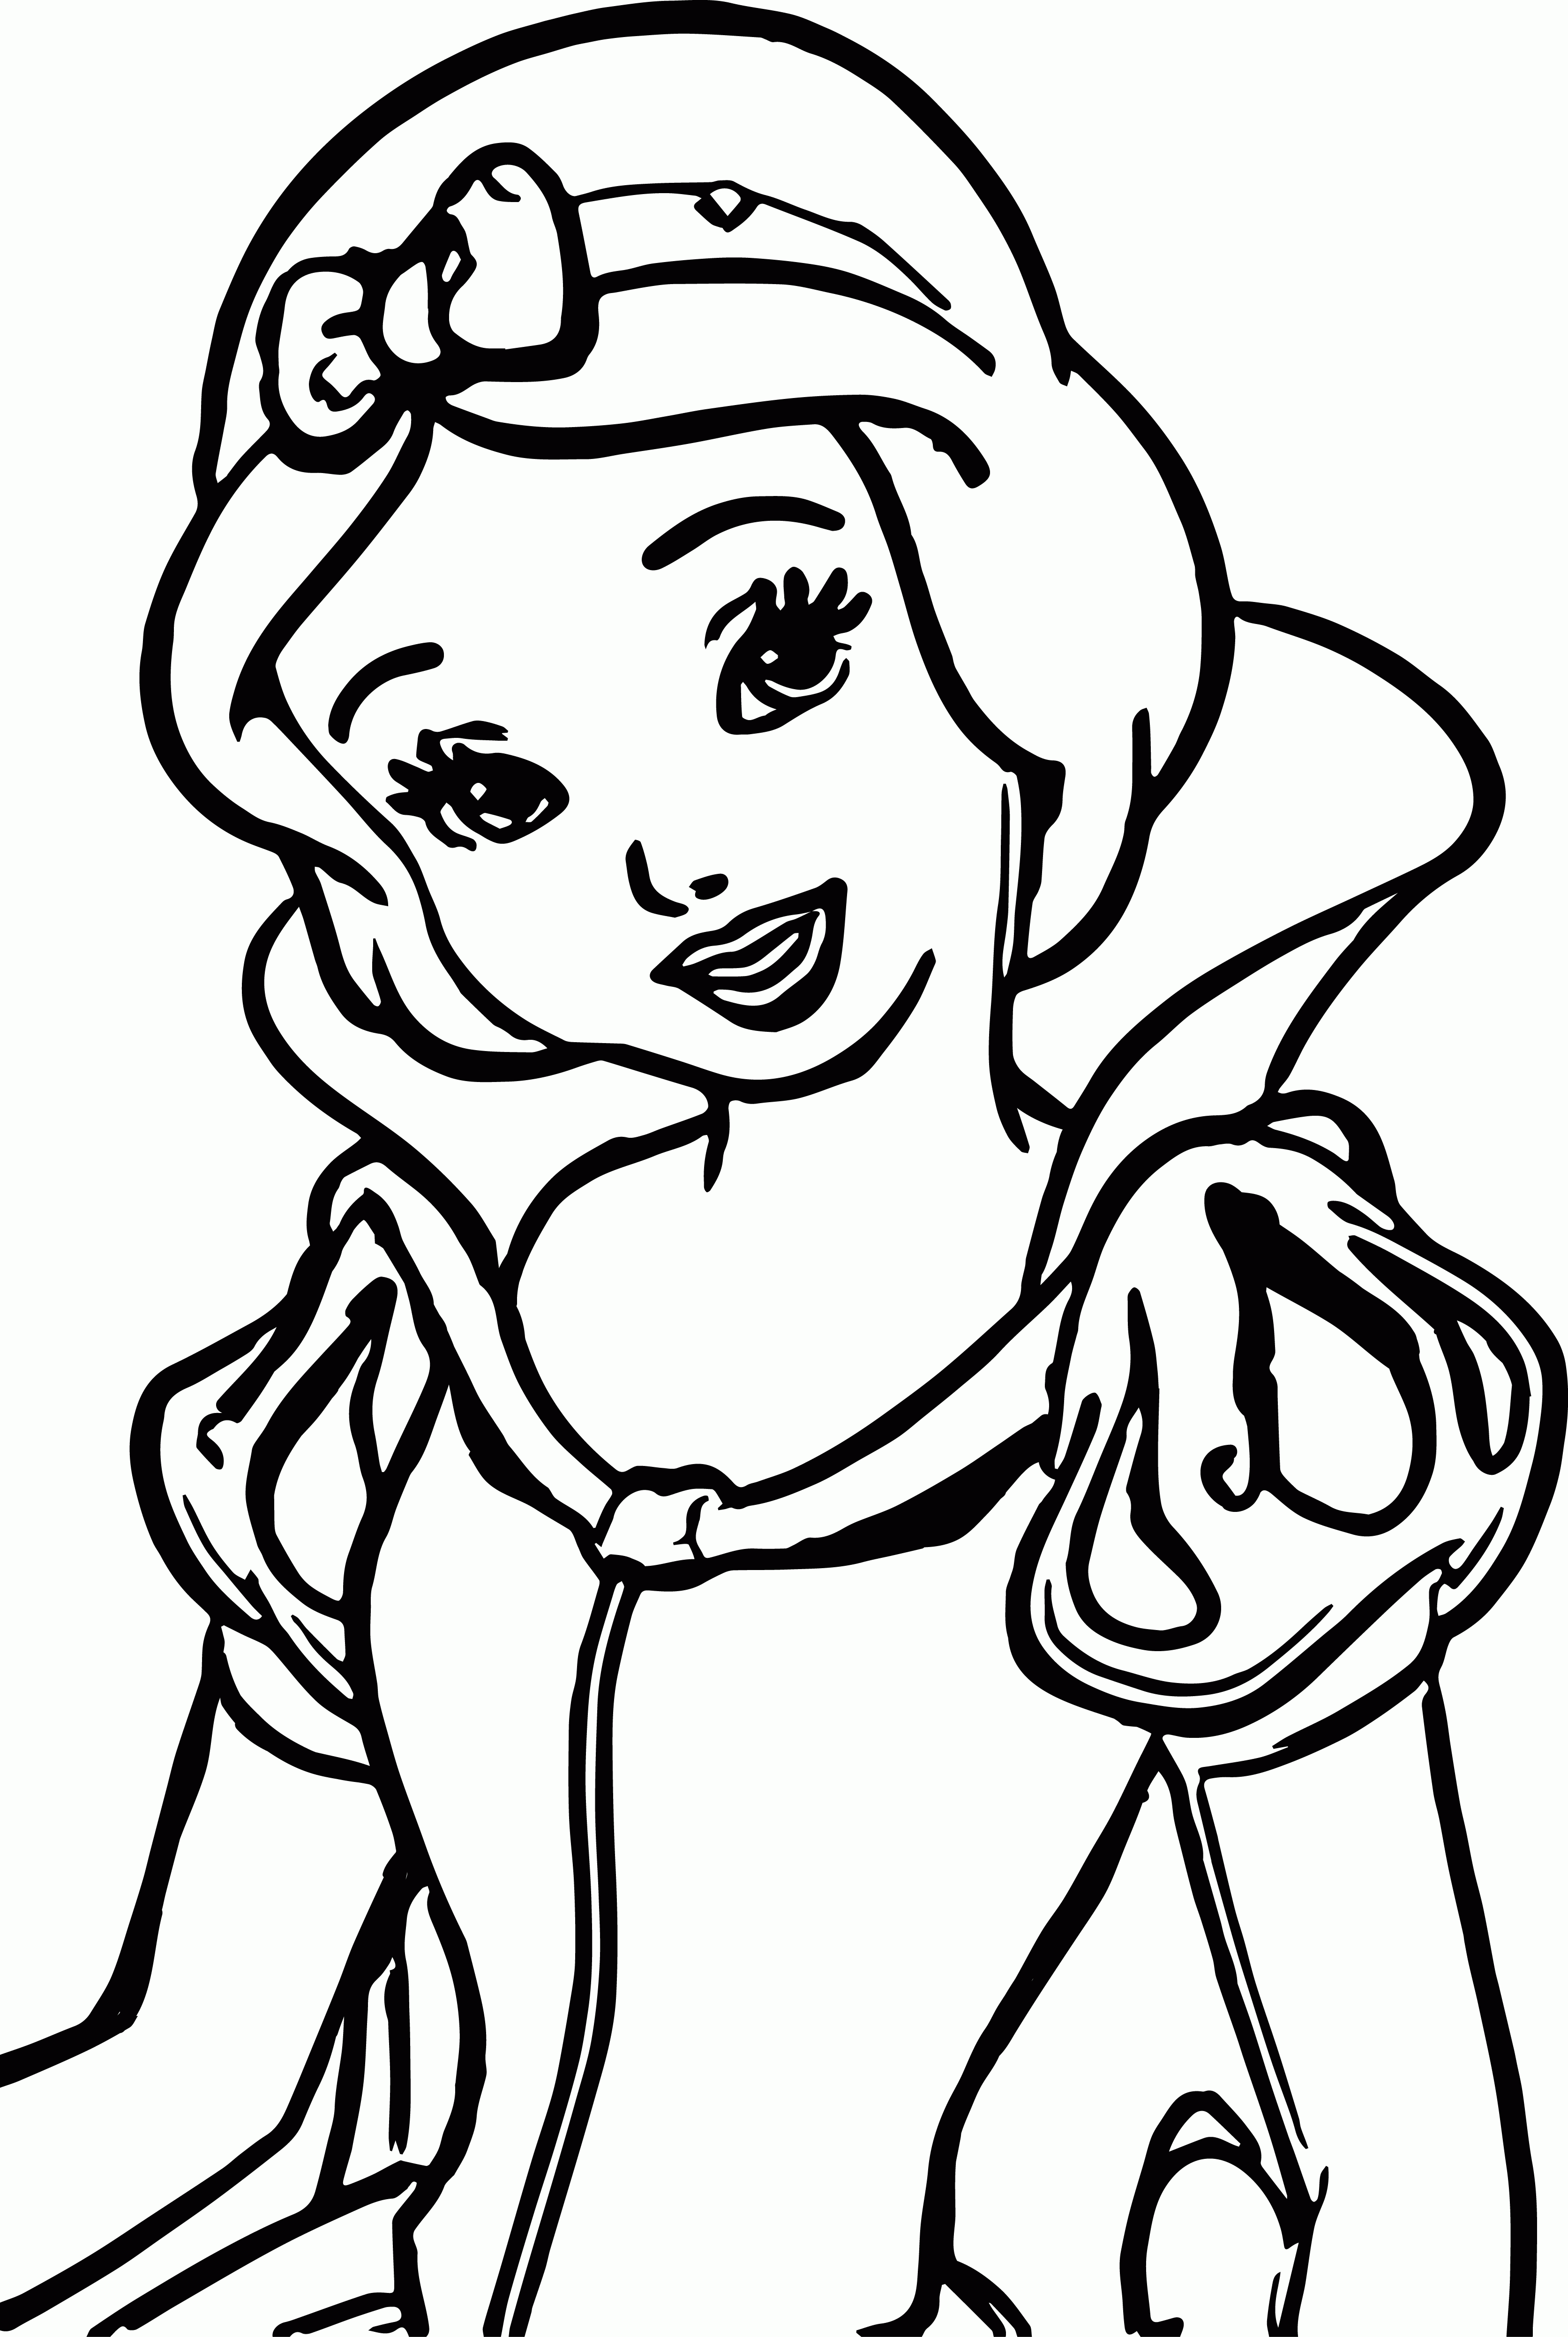 coloring pages cartoon disney christmas coloring pages disney cartoon xmas coloring pages cartoon 